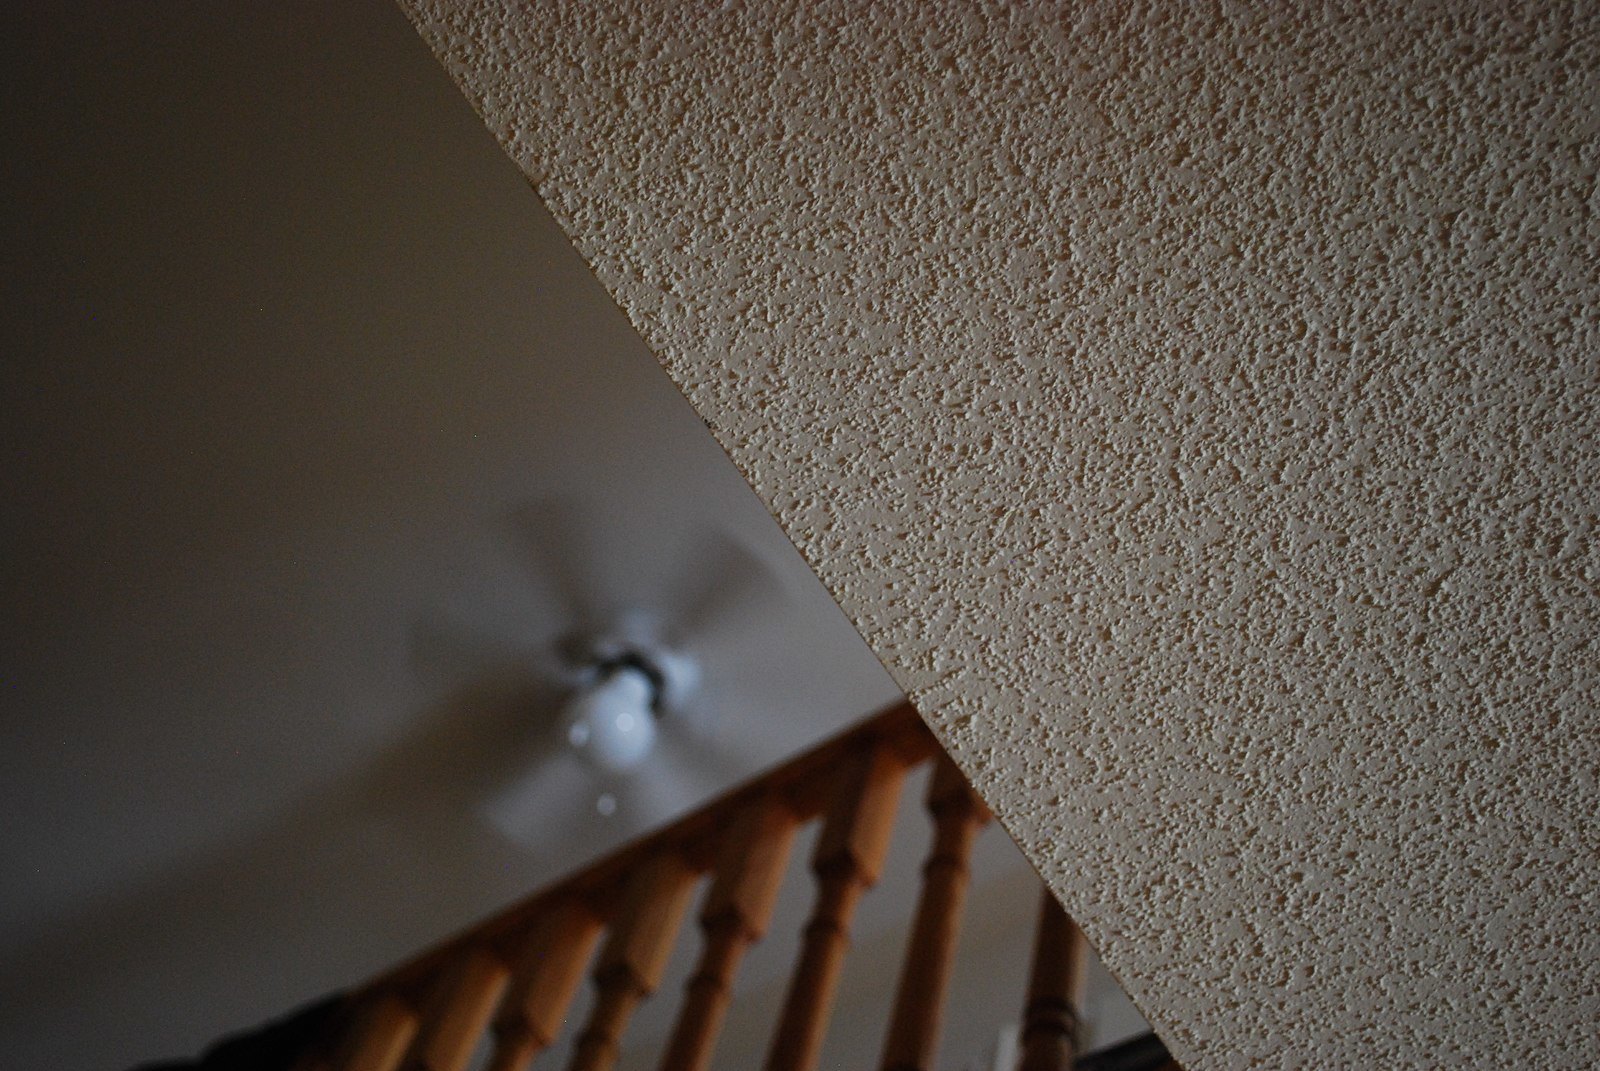 HowTo Guide to Removing Popcorn Ceilings Video » The Money Pit